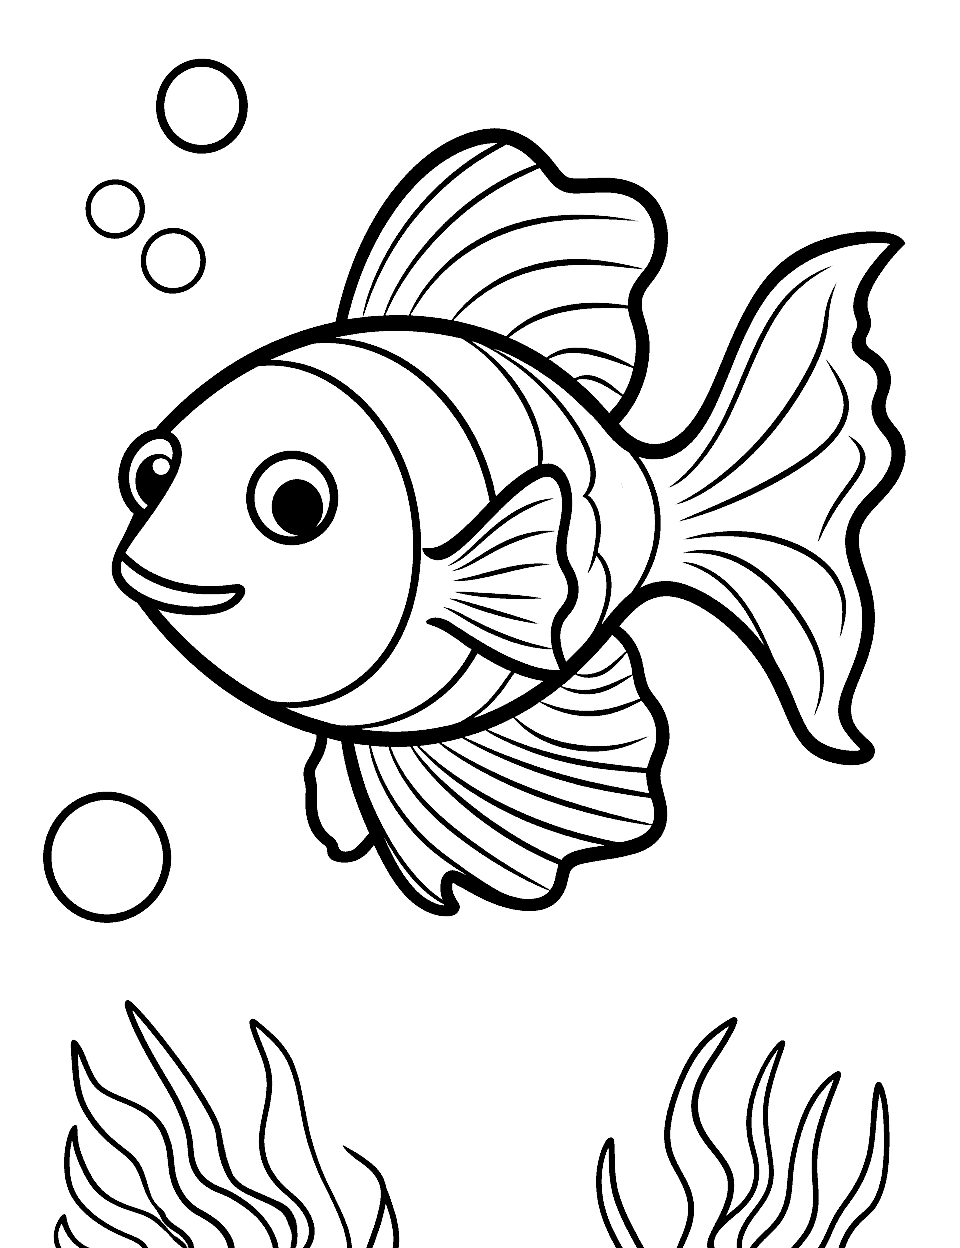 Cute Clownfish Adventure Fish Coloring Page - A cute clownfish exploring a colorful anemone, looking curious and playful.